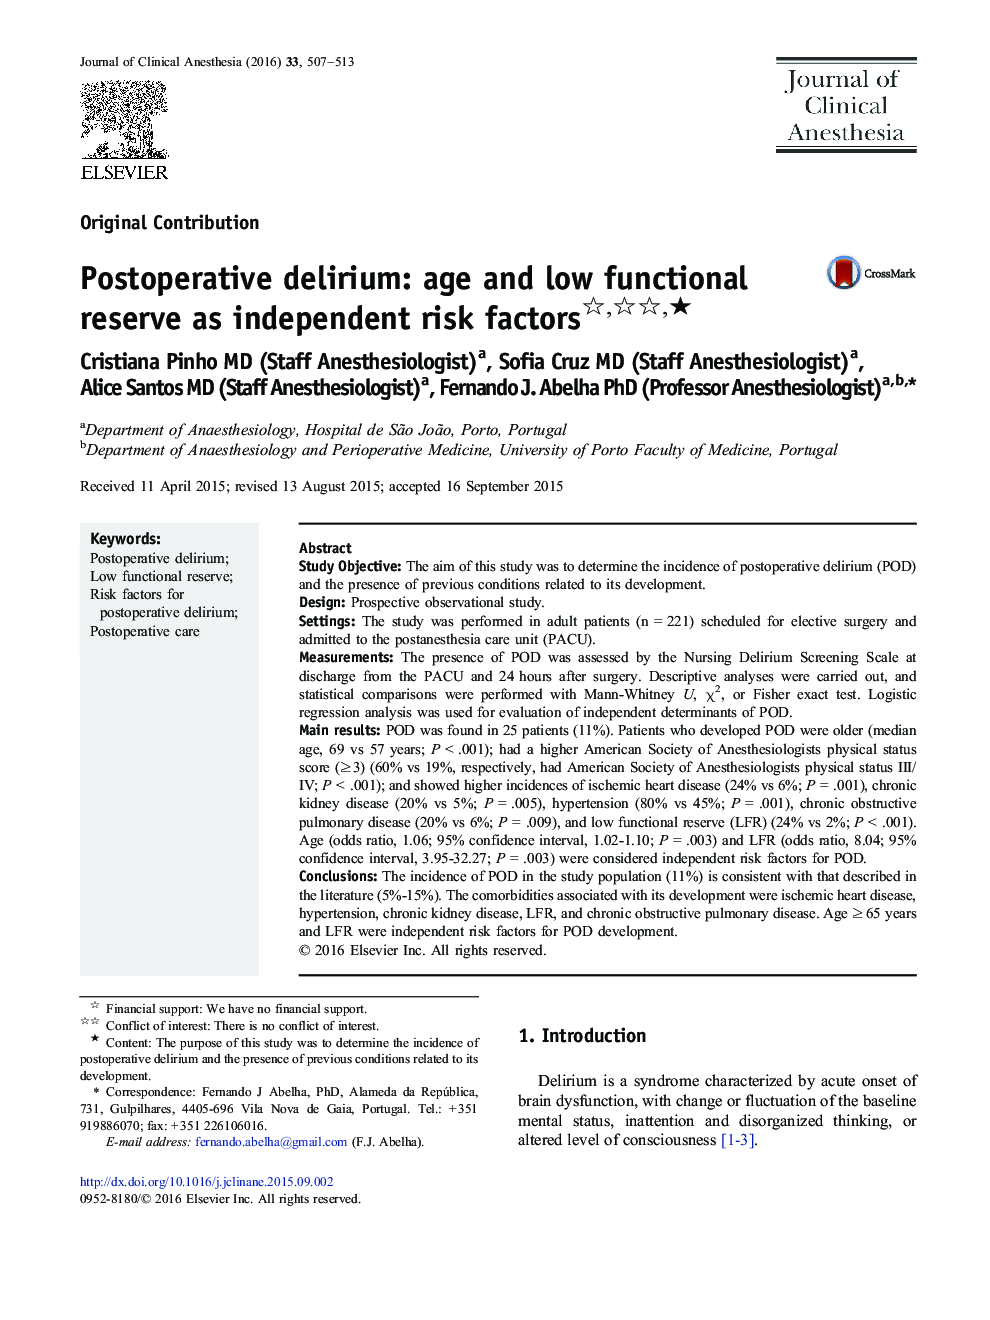 Postoperative delirium: age and low functional reserve as independent risk factors ★